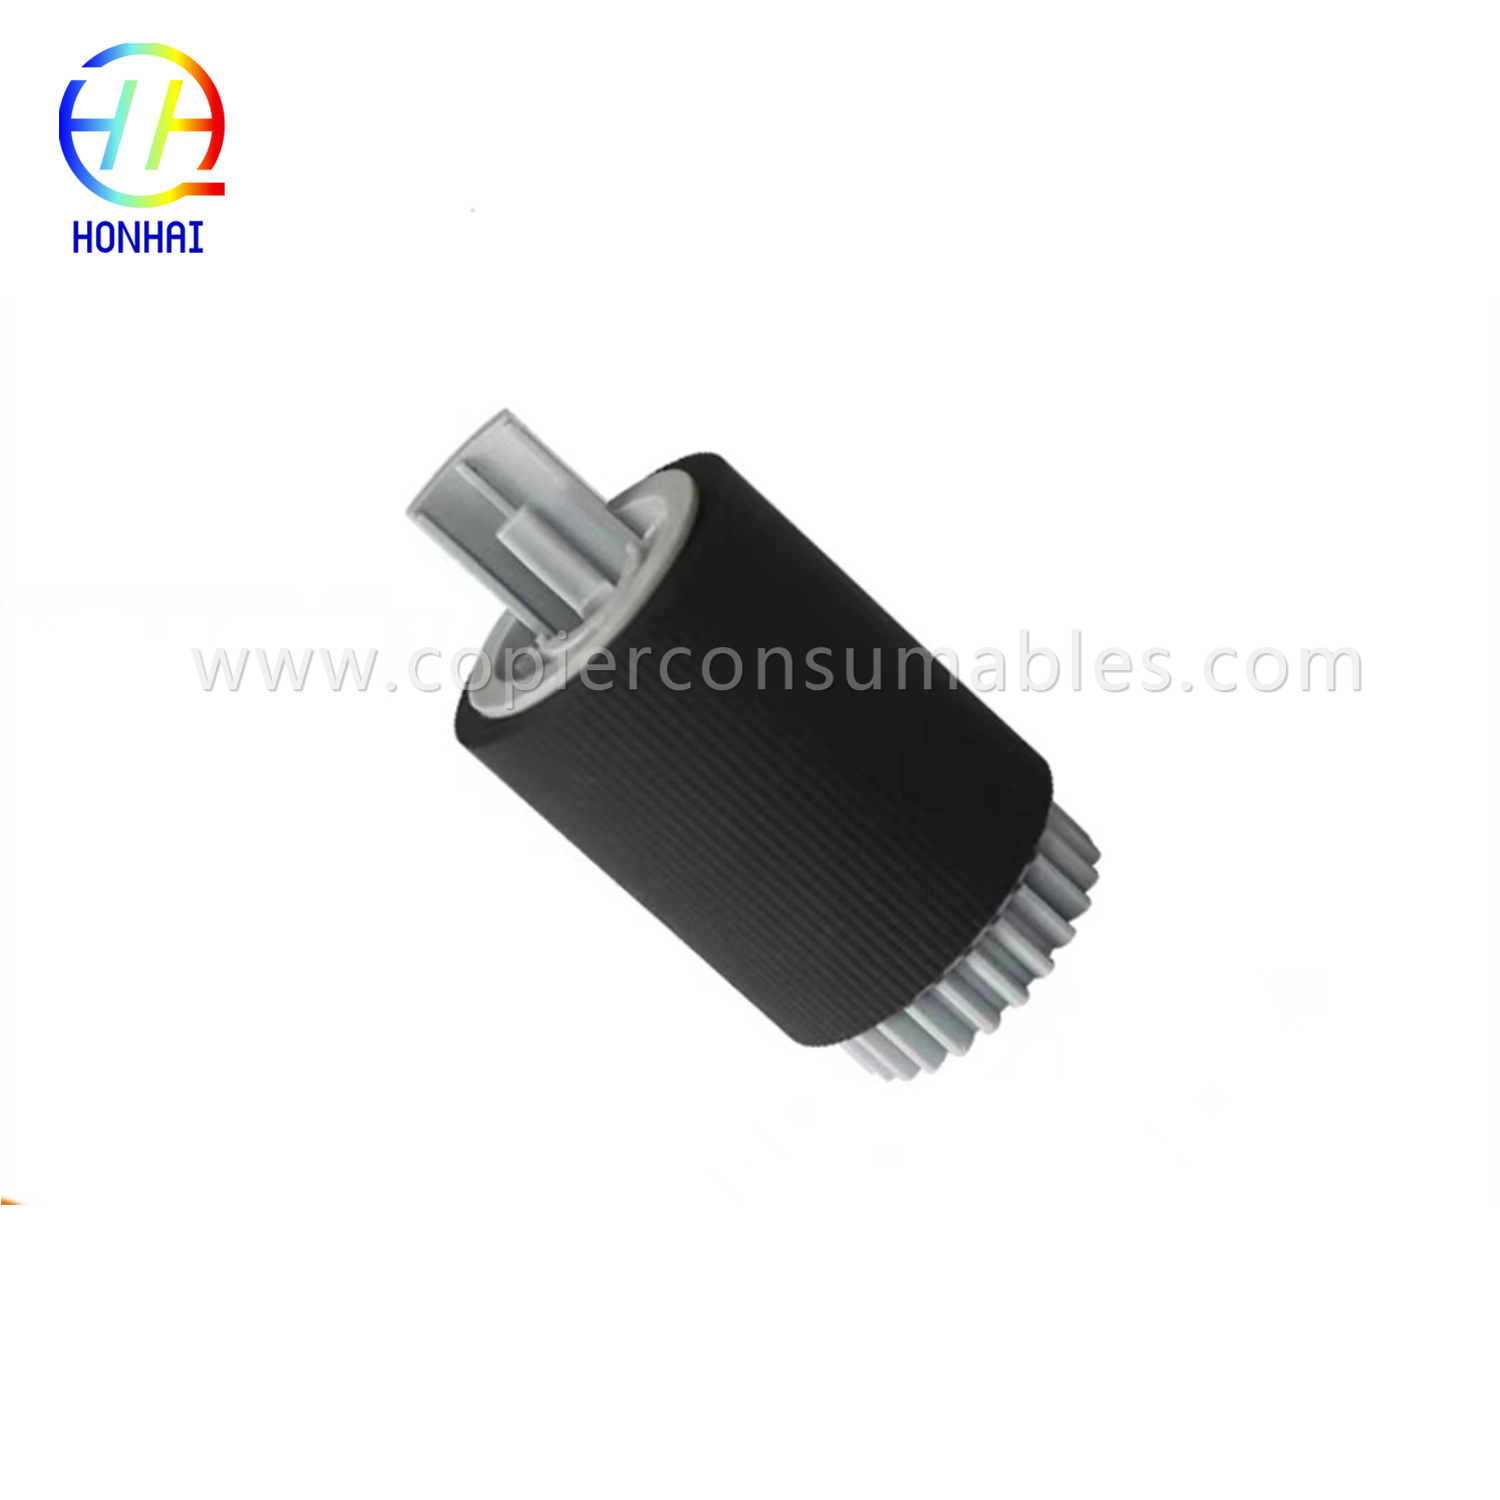 Parper Feed Roller Assembly for Canon FC0-5080-000 FC5-6934-000 FC6-7083-000 FB6-3406-000